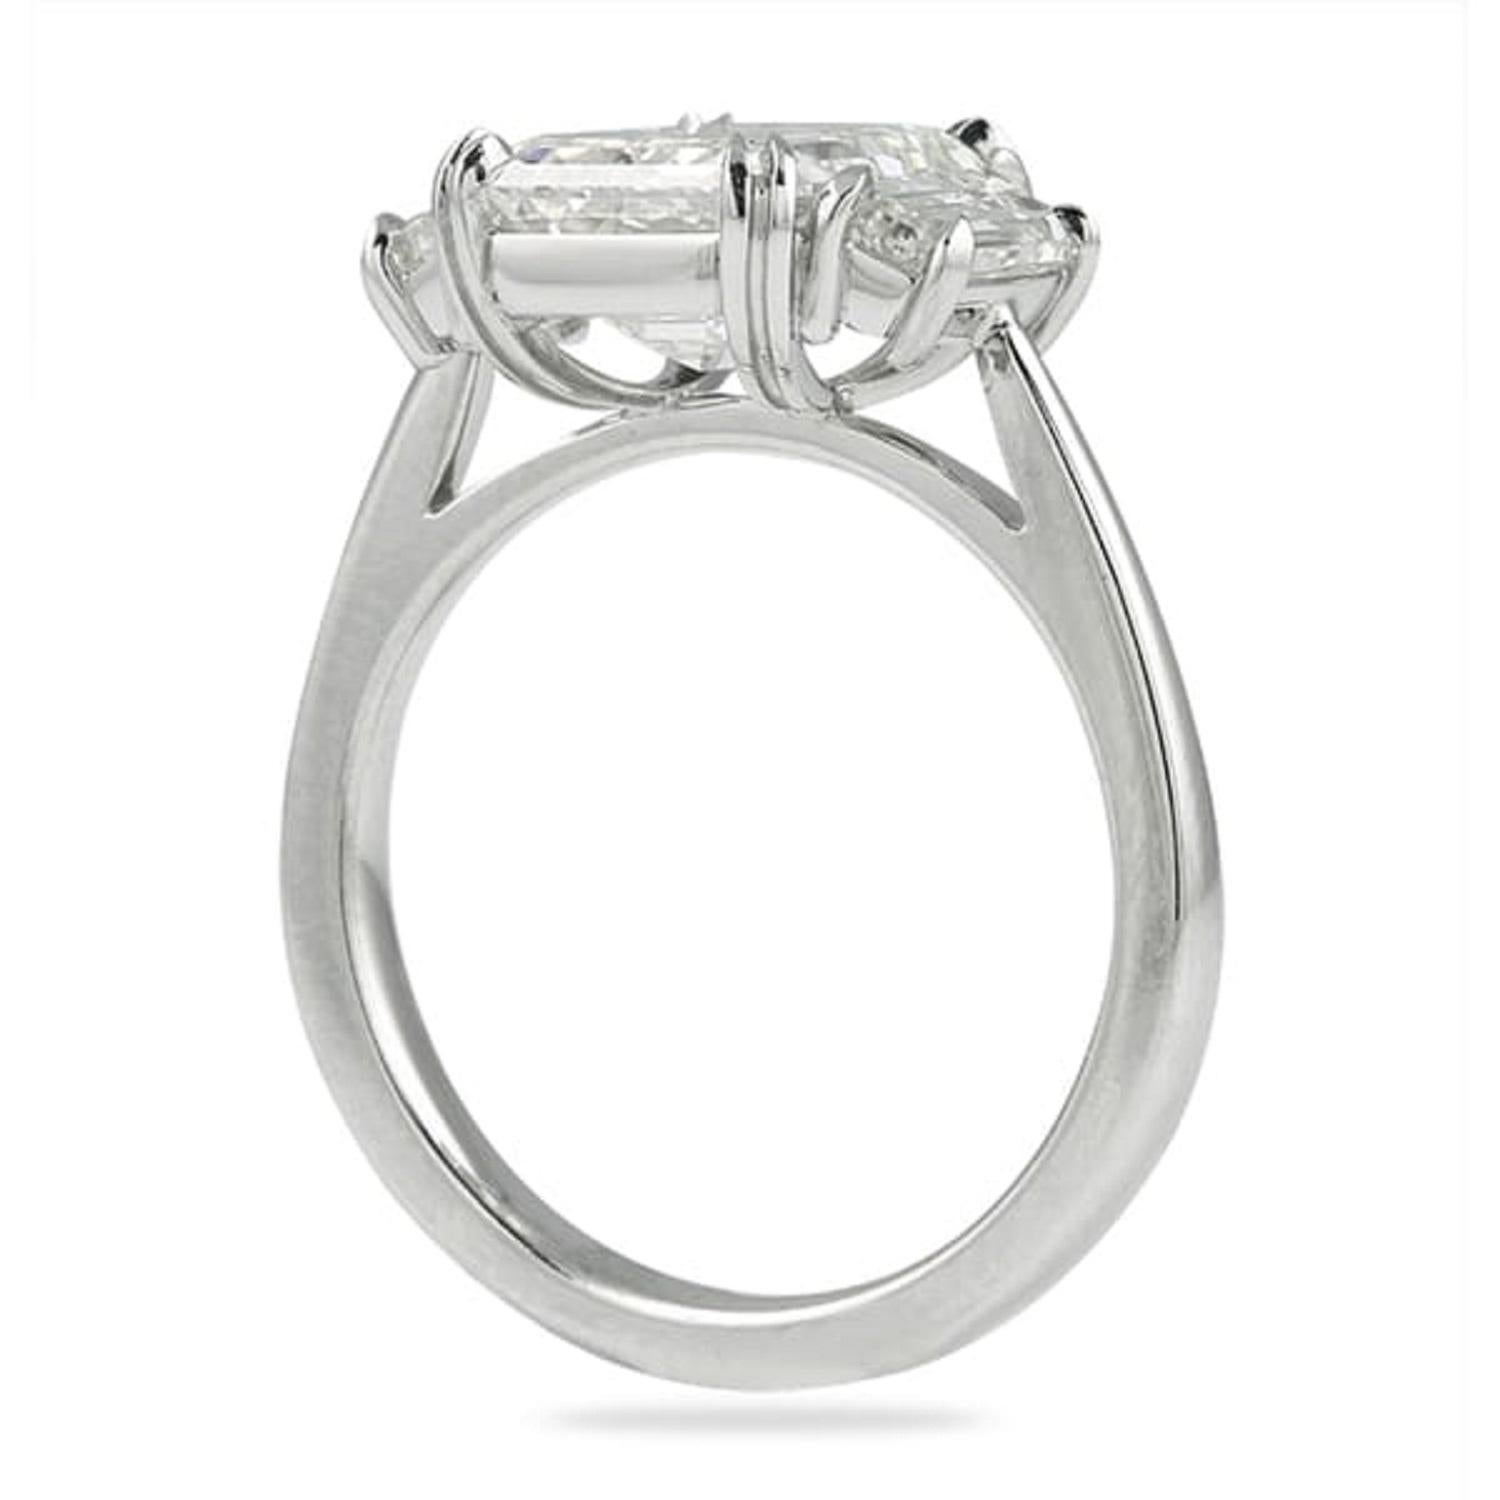 Contemporary Exceptional GIA Certified 4 Carat Excellent Cut Emerald Cut Diamond Ring For Sale